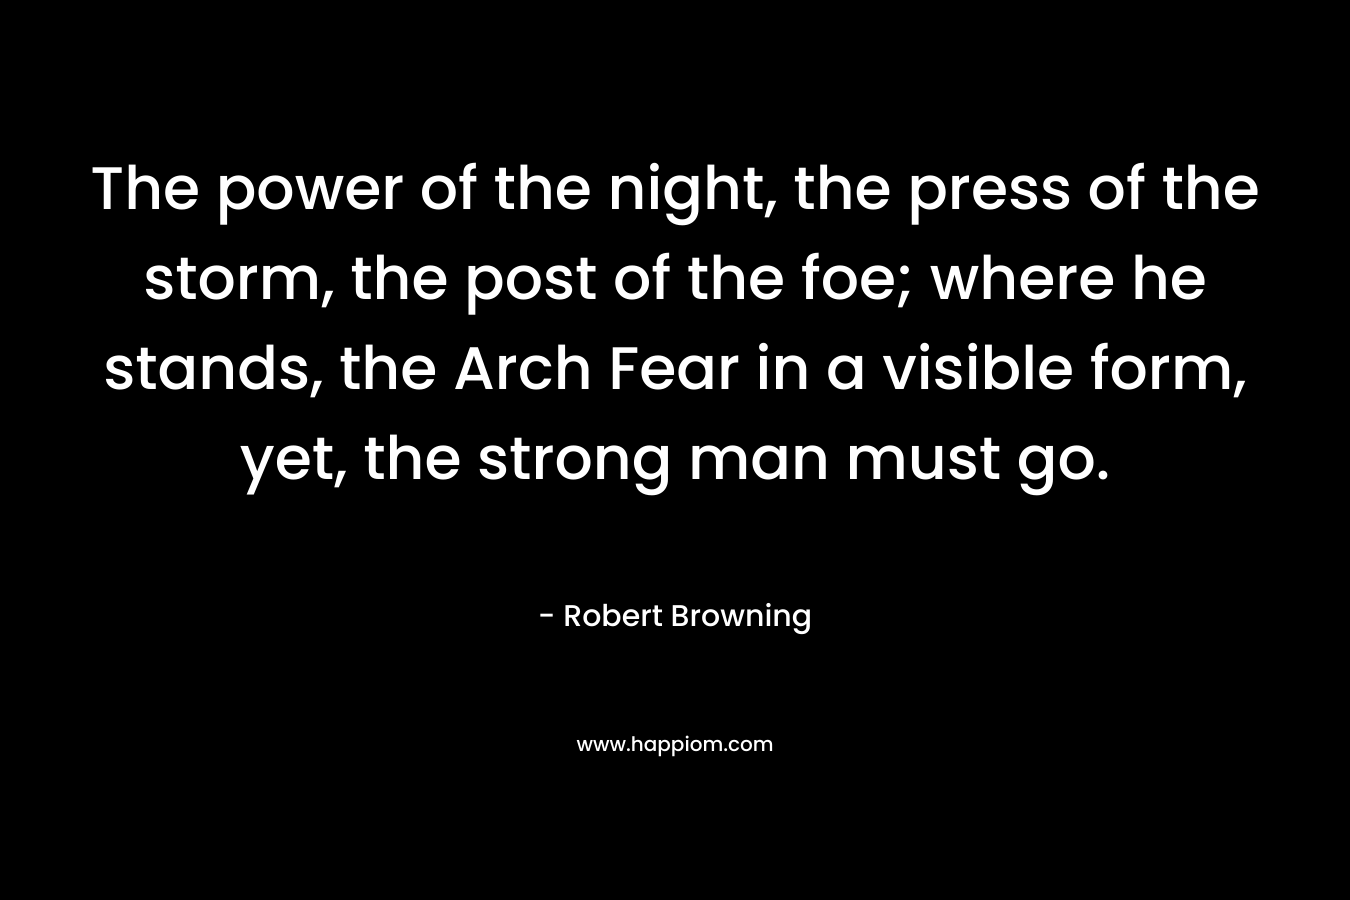 The power of the night, the press of the storm, the post of the foe; where he stands, the Arch Fear in a visible form, yet, the strong man must go. – Robert Browning